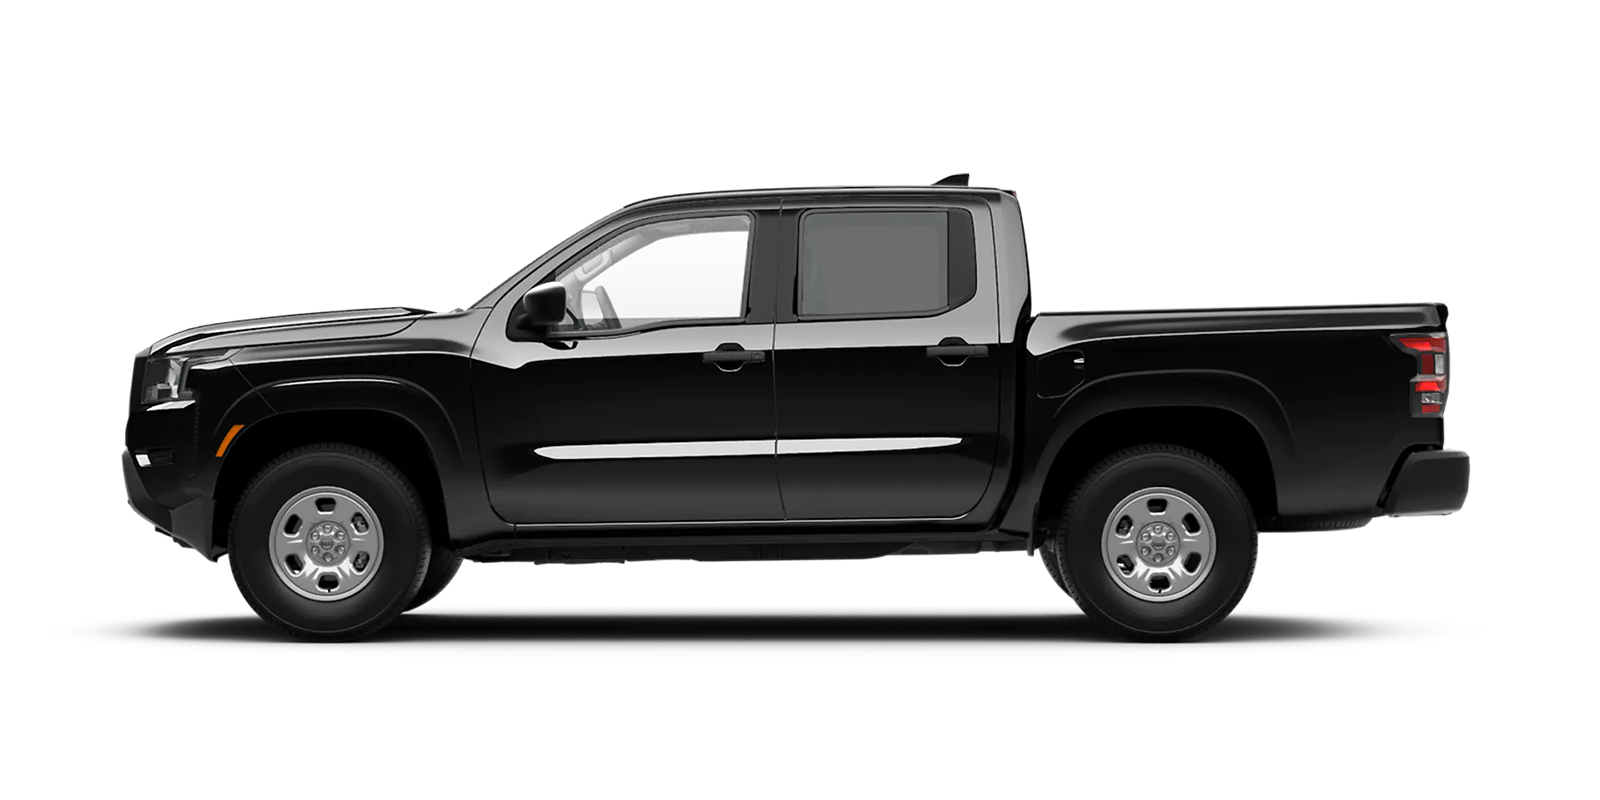 2022 Frontier Crew Cab S 4x4 in Super Black | King Windward Nissan in Kaneohe HI